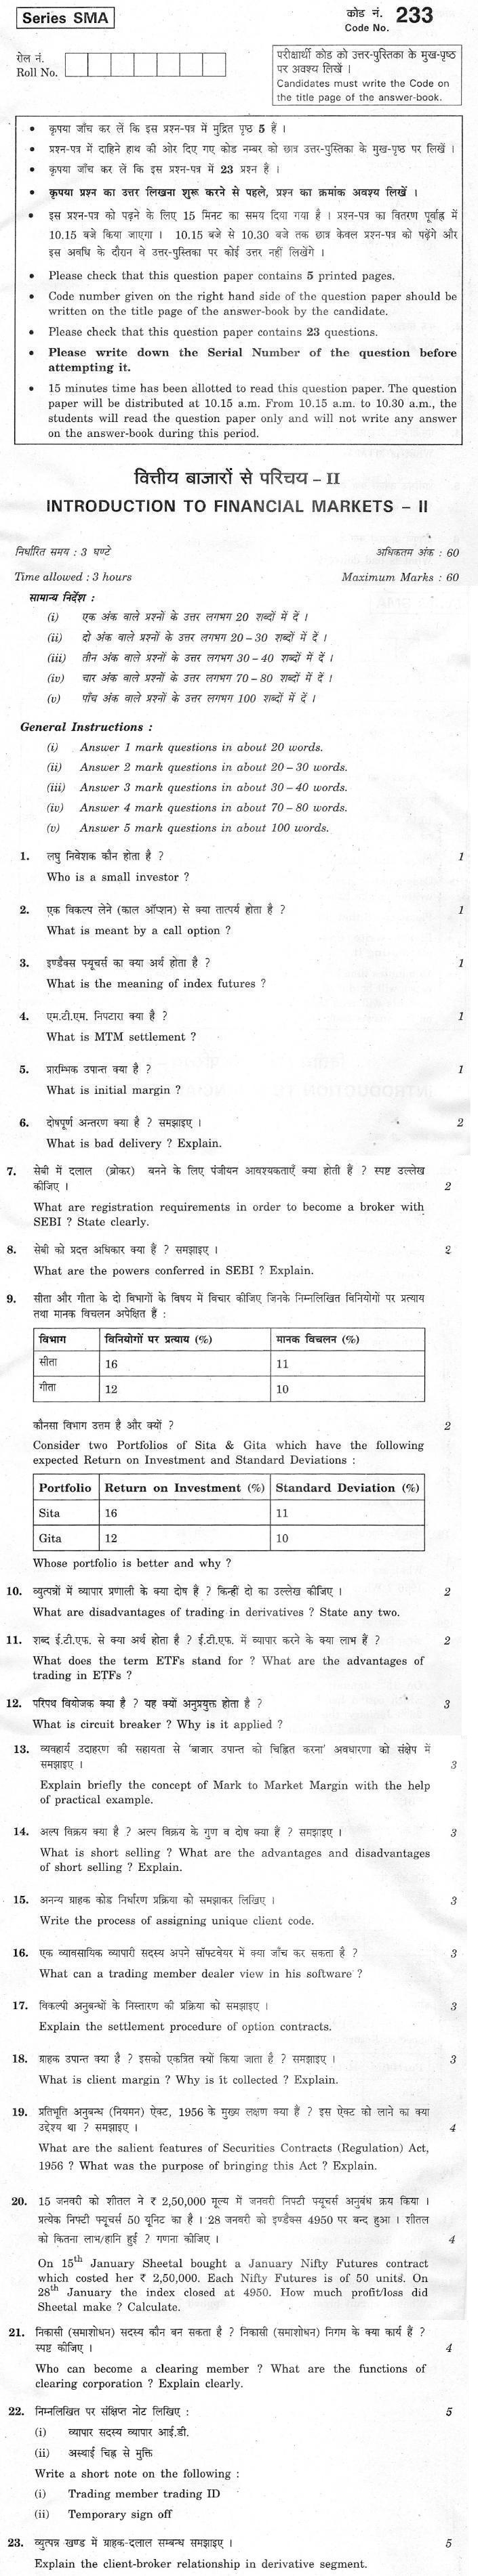 CBSE Class XII Previous Year Question Paper 2012 Introduction to Financial Markets-II